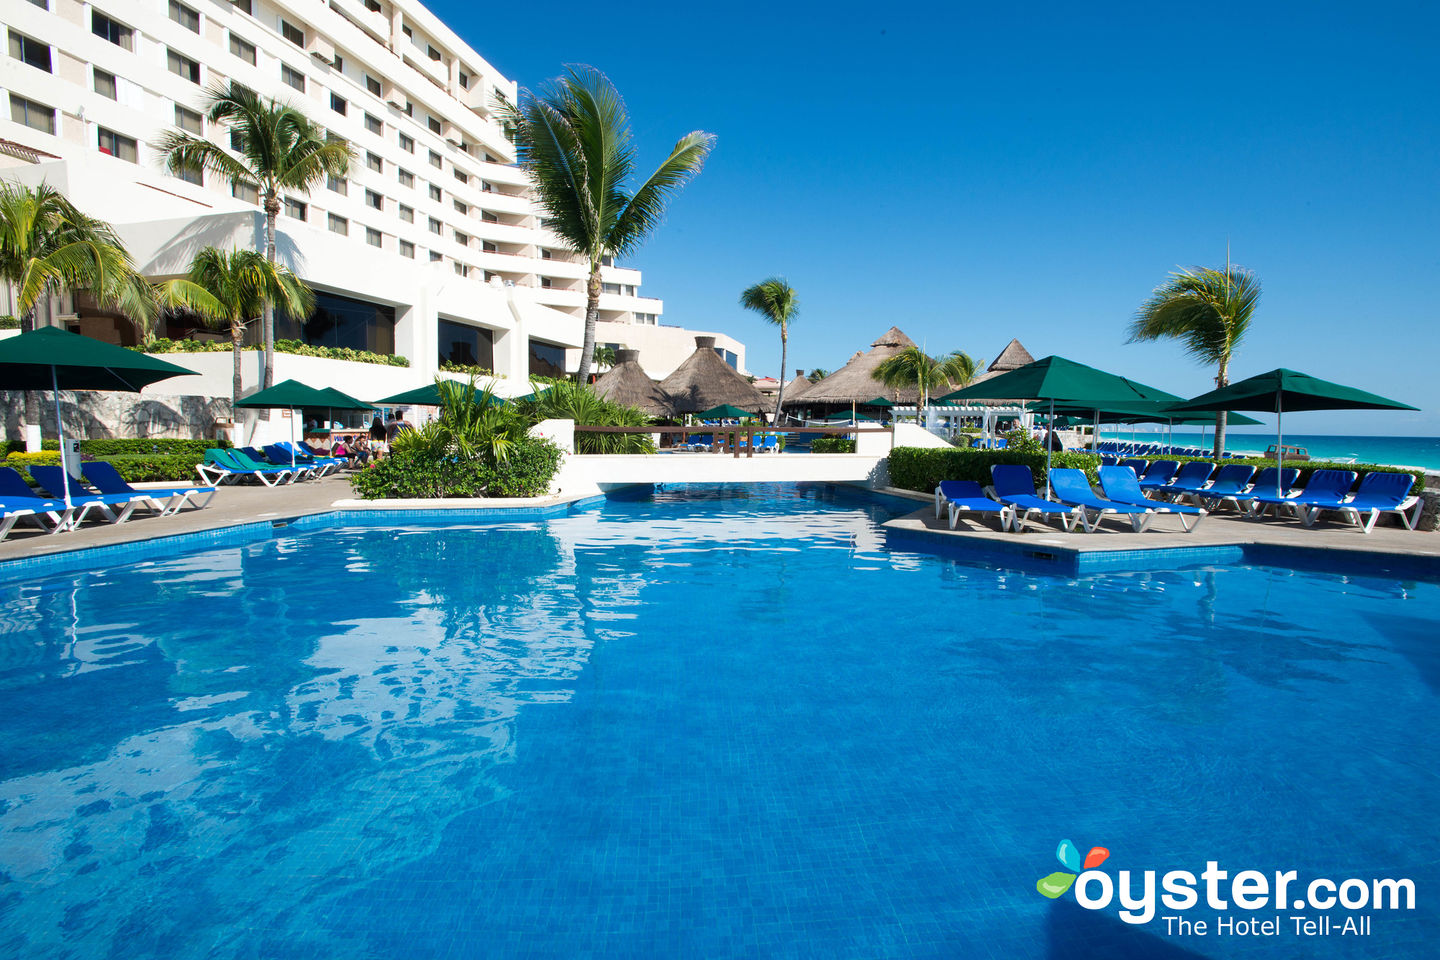 Royal Solaris Cancun Review: What To REALLY Expect If You Stay